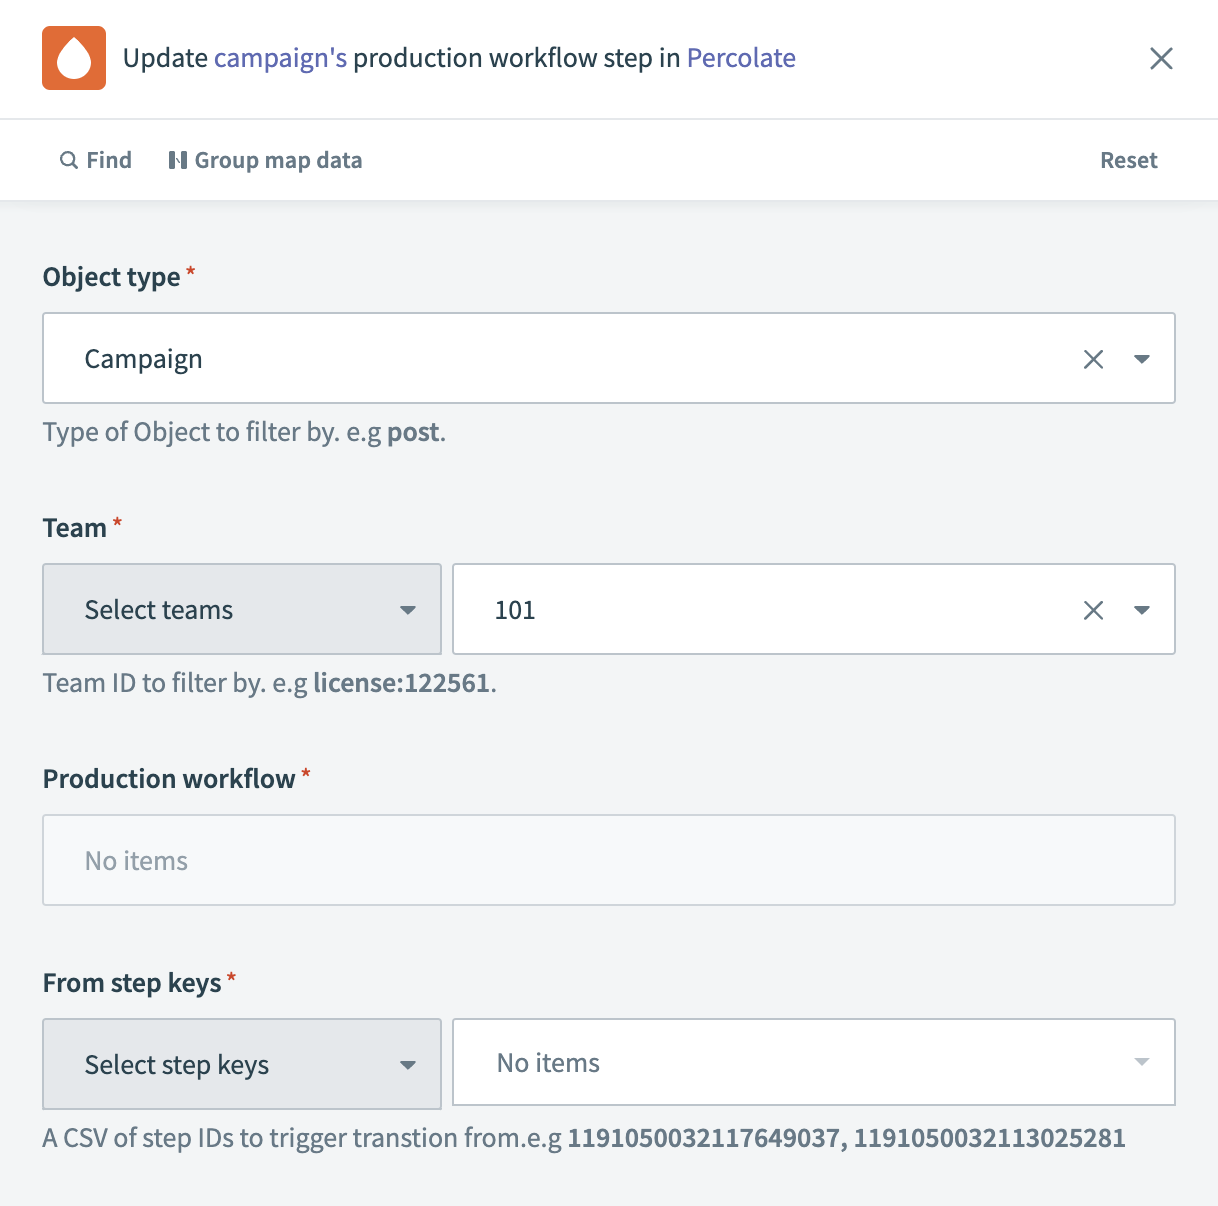 Update Object's Production Workflow Step in Percolate action